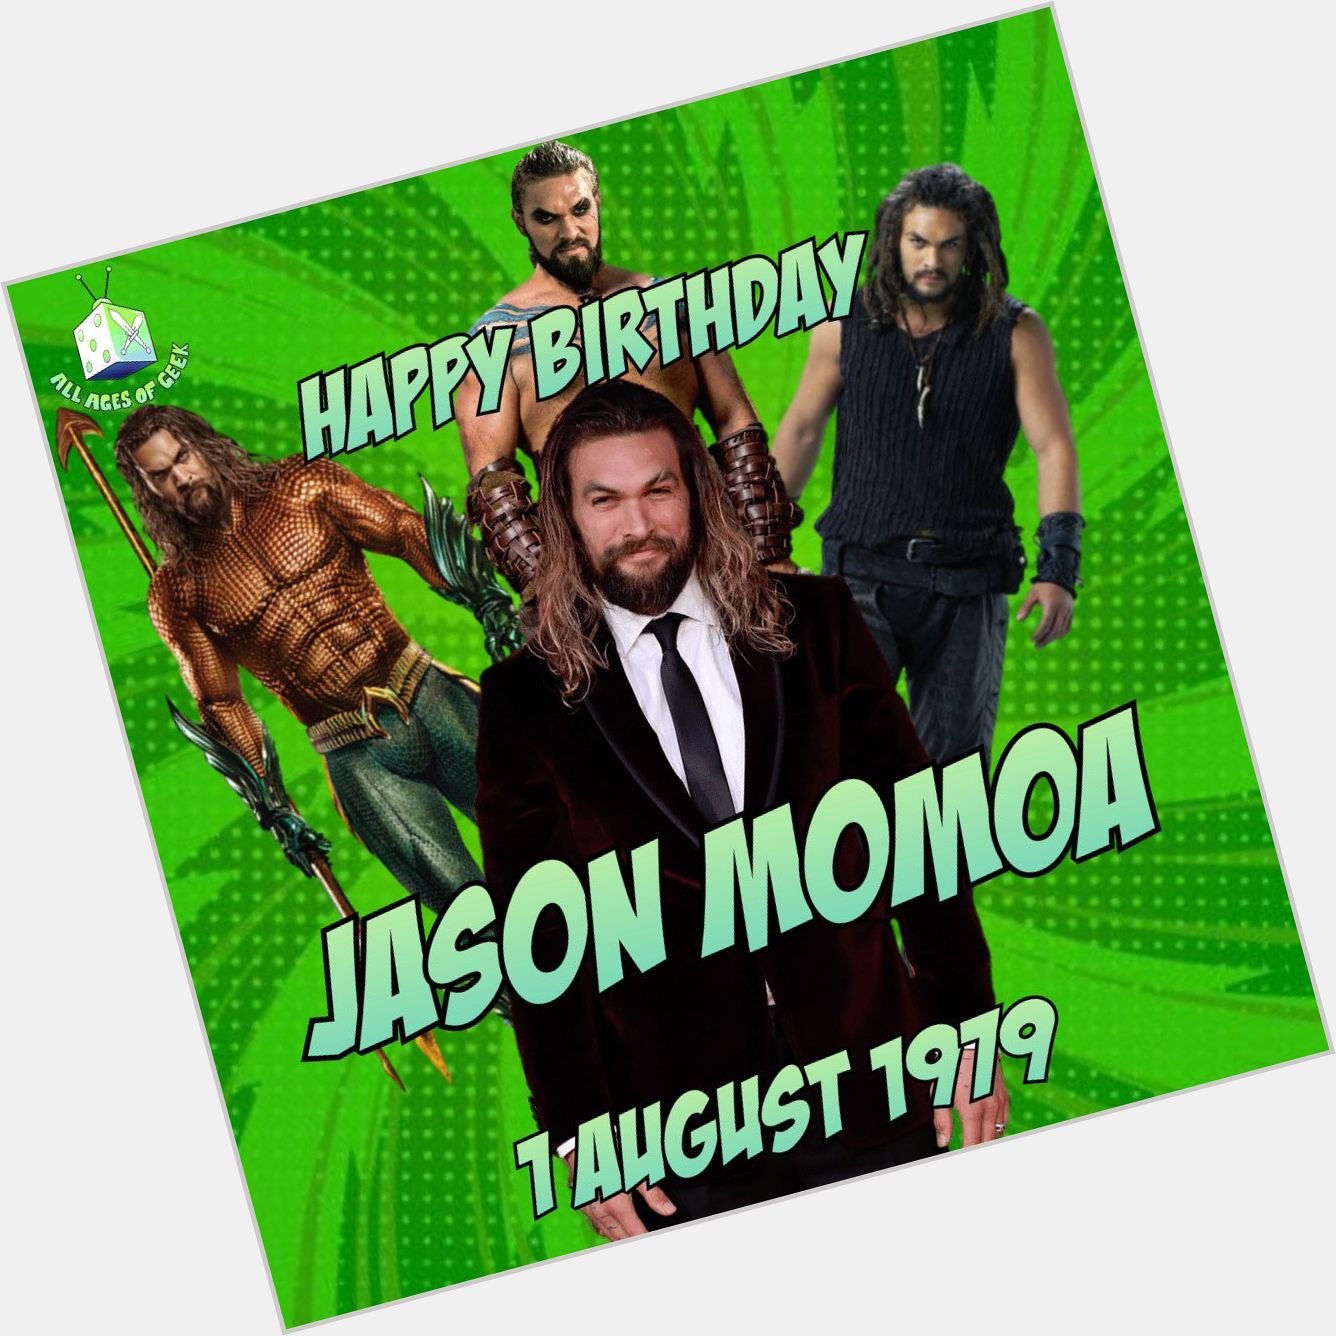 From the Stargate Universe to Game of Thrones and now the DCEU. Jason Momoa is one awesome dude. Happy Birthday! 